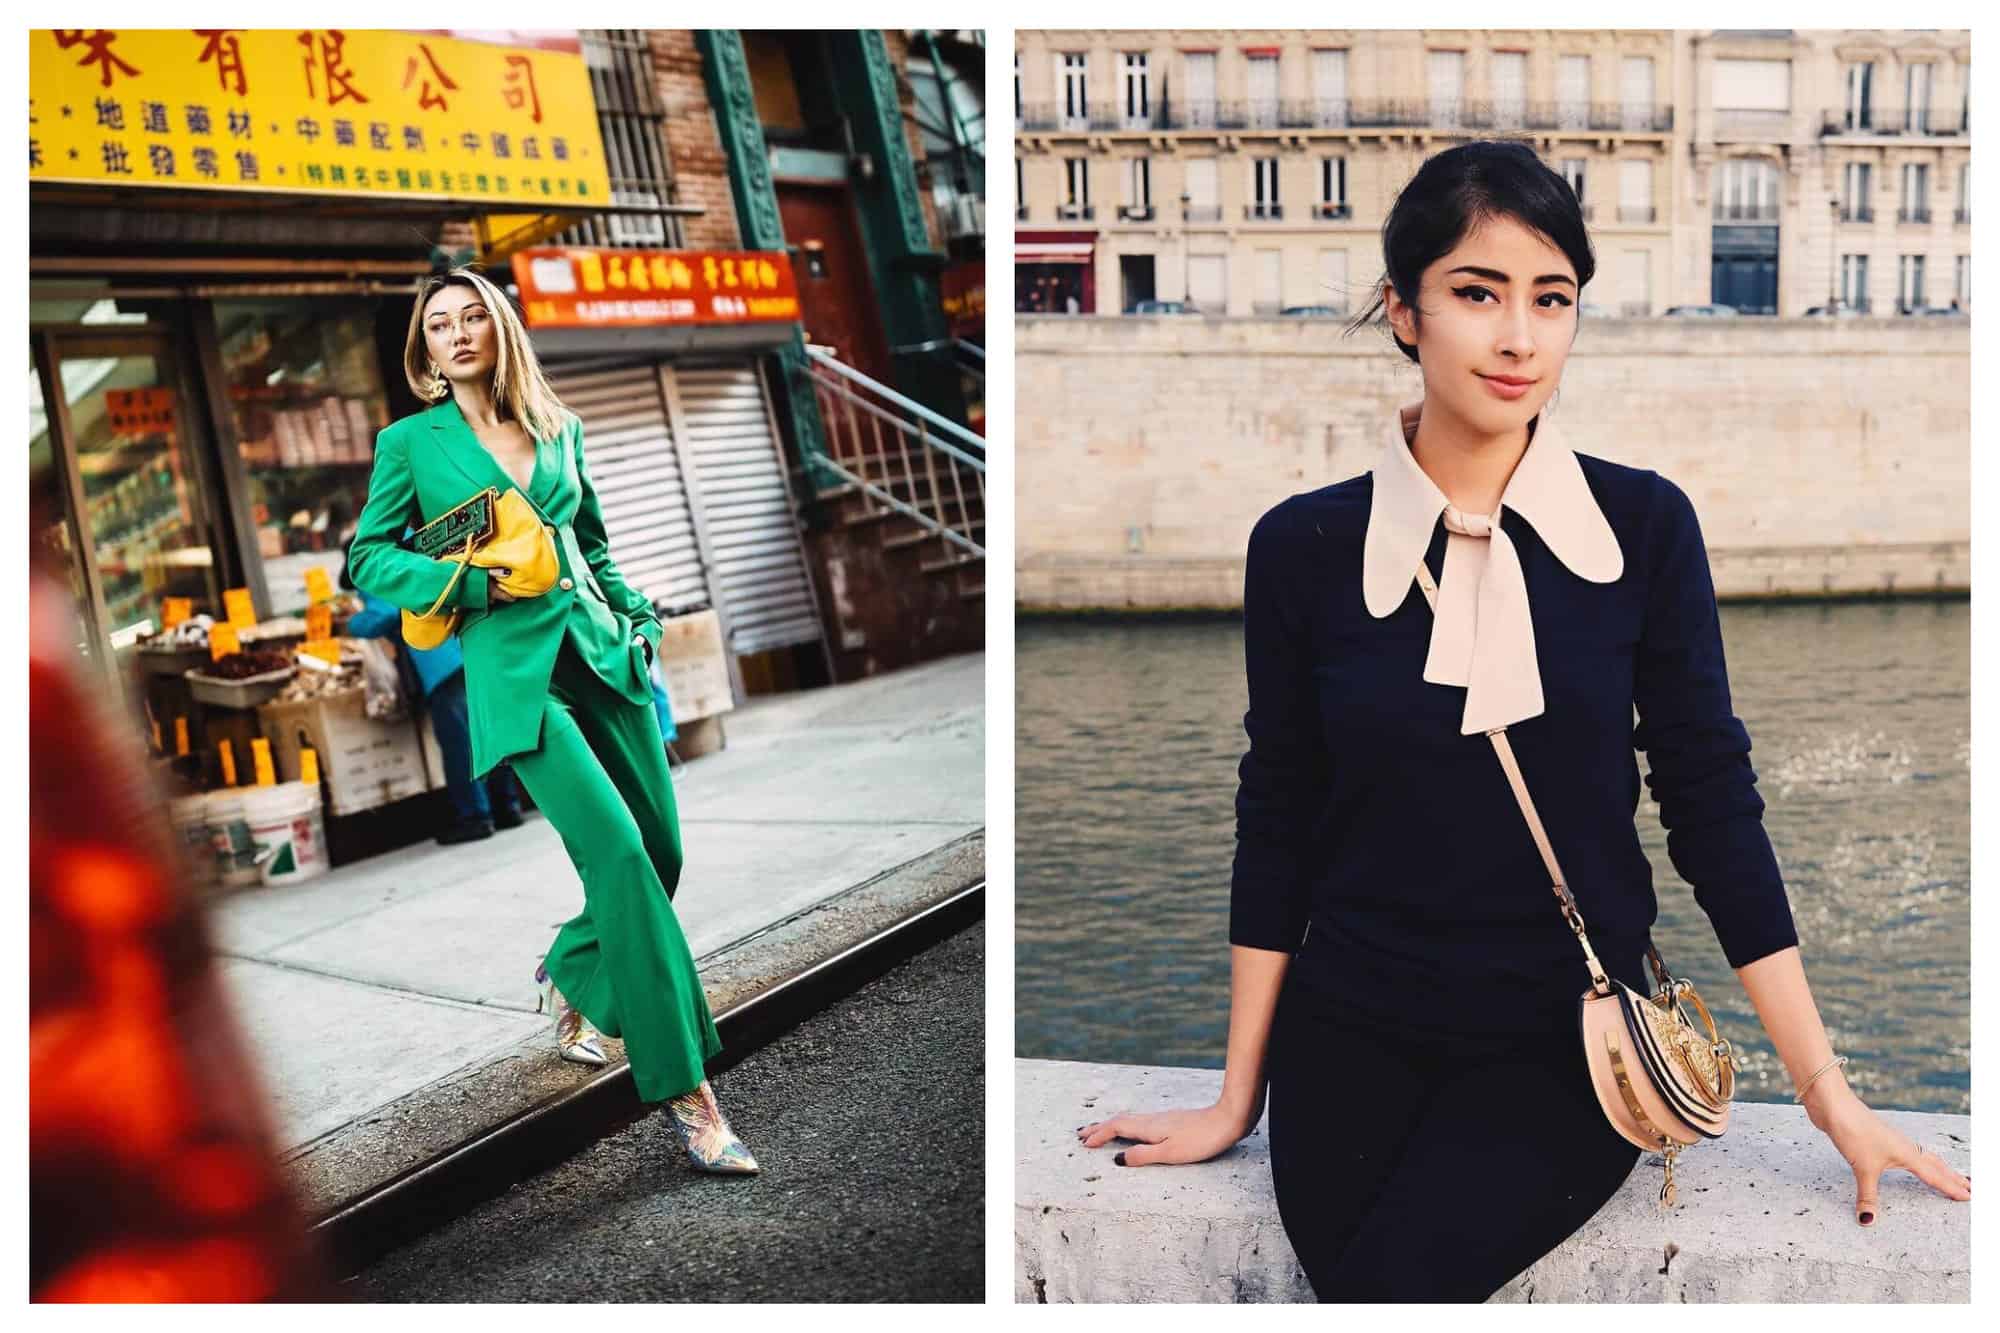 Left: Fashion influencer Jessica Wang is in China Town, NYC. She is crossing the street. She is wearing an emerald-green power suit white light blue stilettos and a yellow bag. Right: Fashion blogger Denni Elias is sitting by the Seine River in Paris. She is wearing a black top with a nude pink bow tie collar, black pants, and a brown leather purse strapped across her torso.